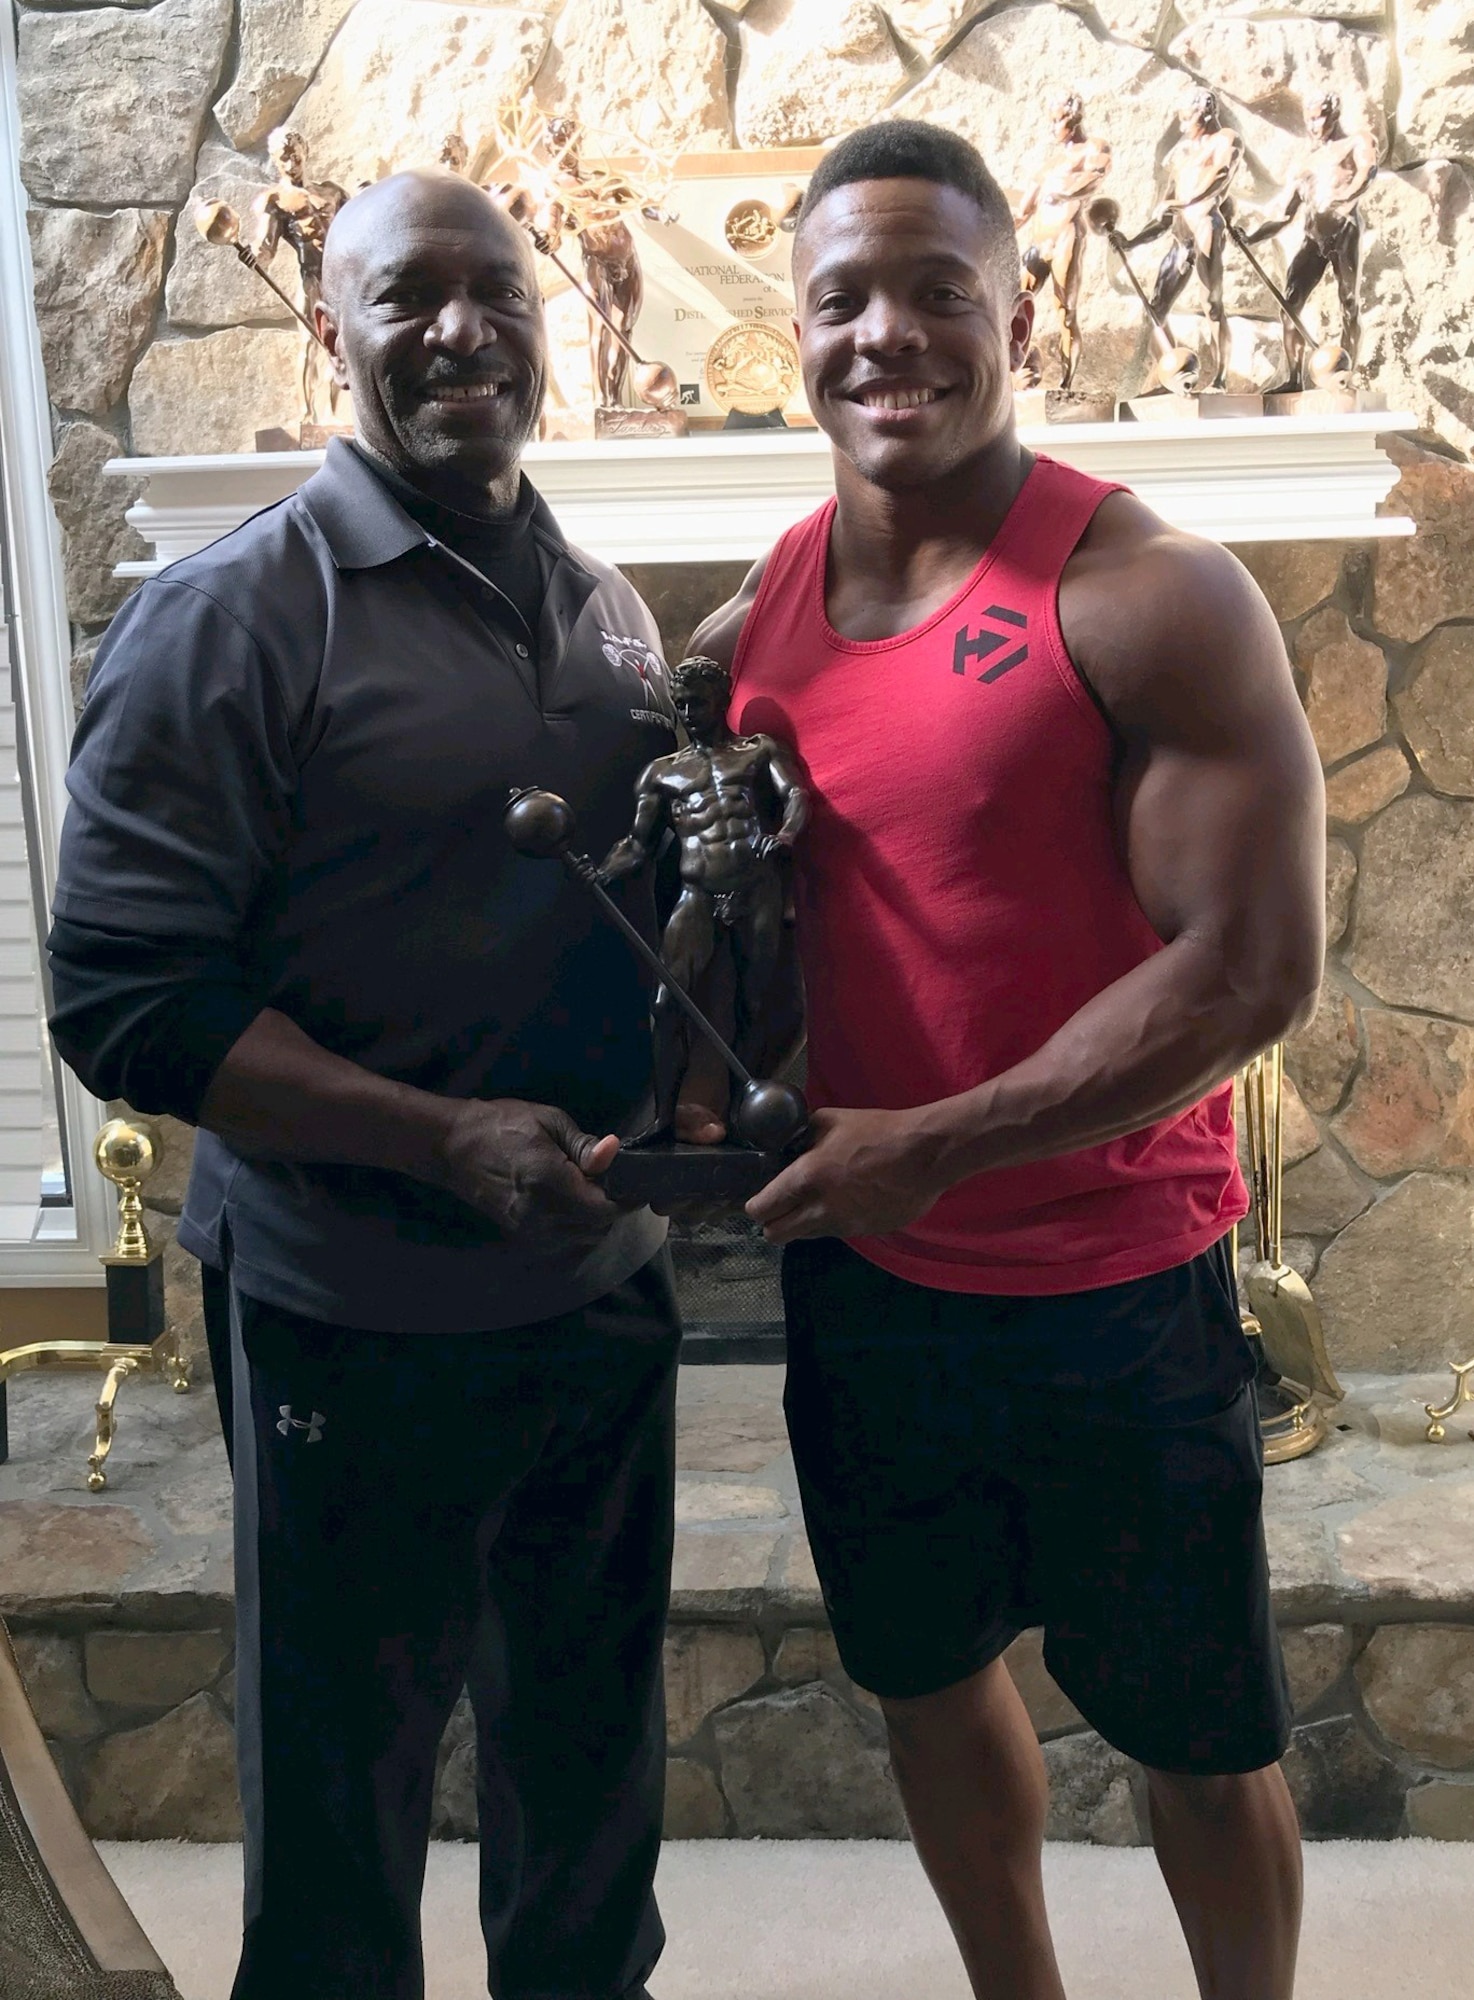 Staff Sgt. Geremy Satcher takes a photo with eight-time Mr. Olympia, Lee Haney as they hold one of his trophies. Haney became a mentor for Satcher when he was a body builder.